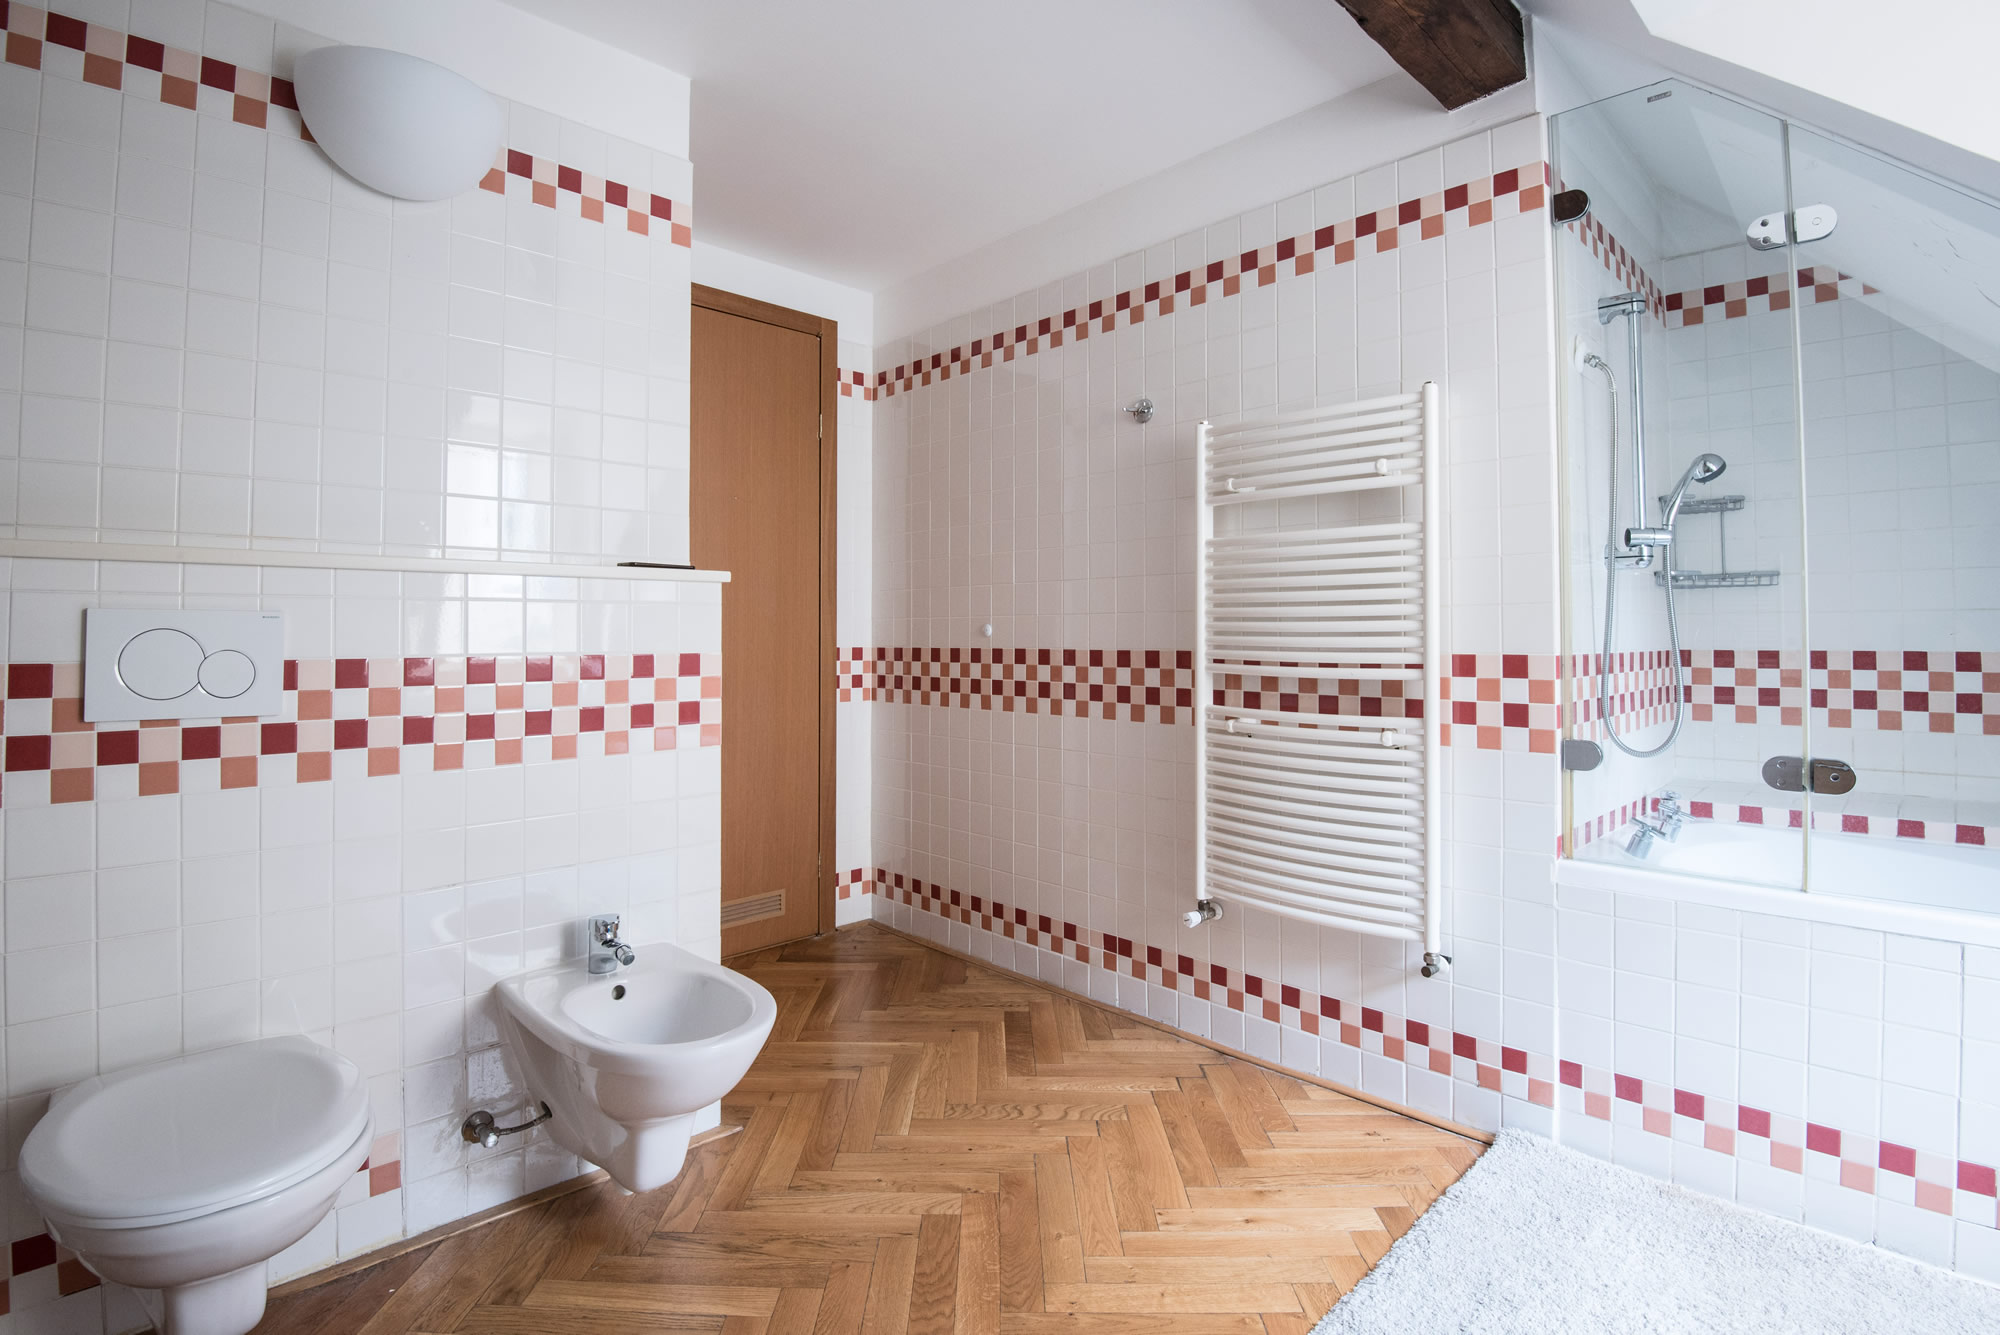 Large bathroom with wooden parquet covered with white tiles. There is a bath tube, toilet and bidet.